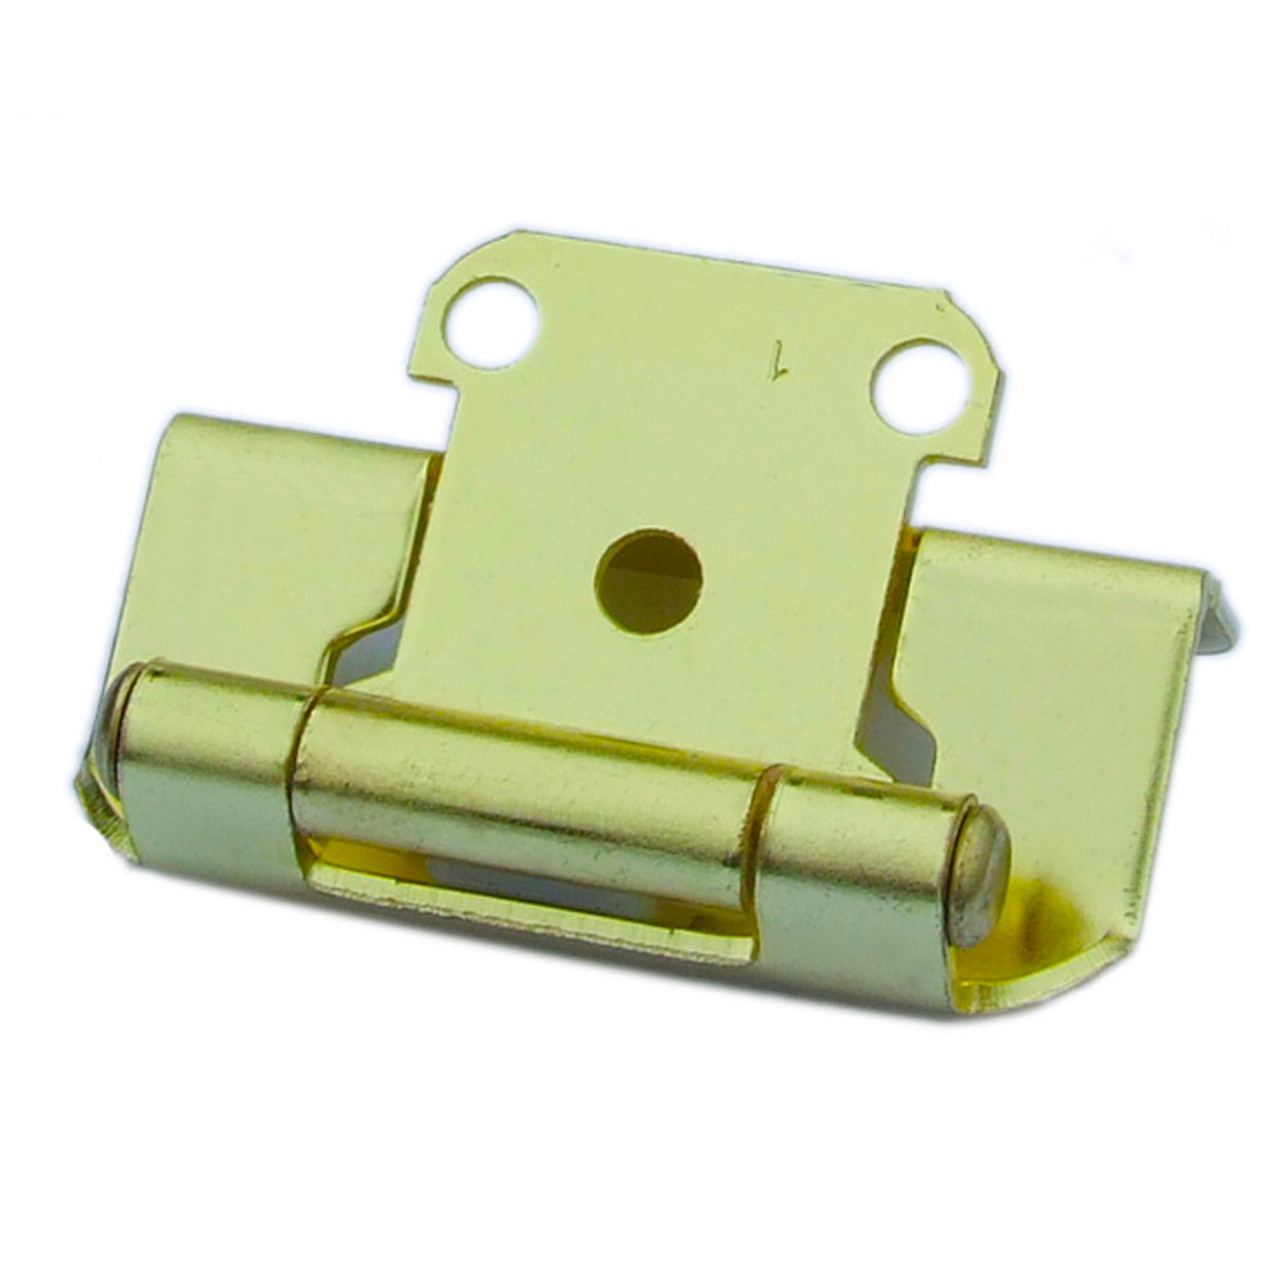 SC9460-BP 2 1/4" x 1 1/2" Polished Brass Self-Closing Cabinet Hinges 2 Pack